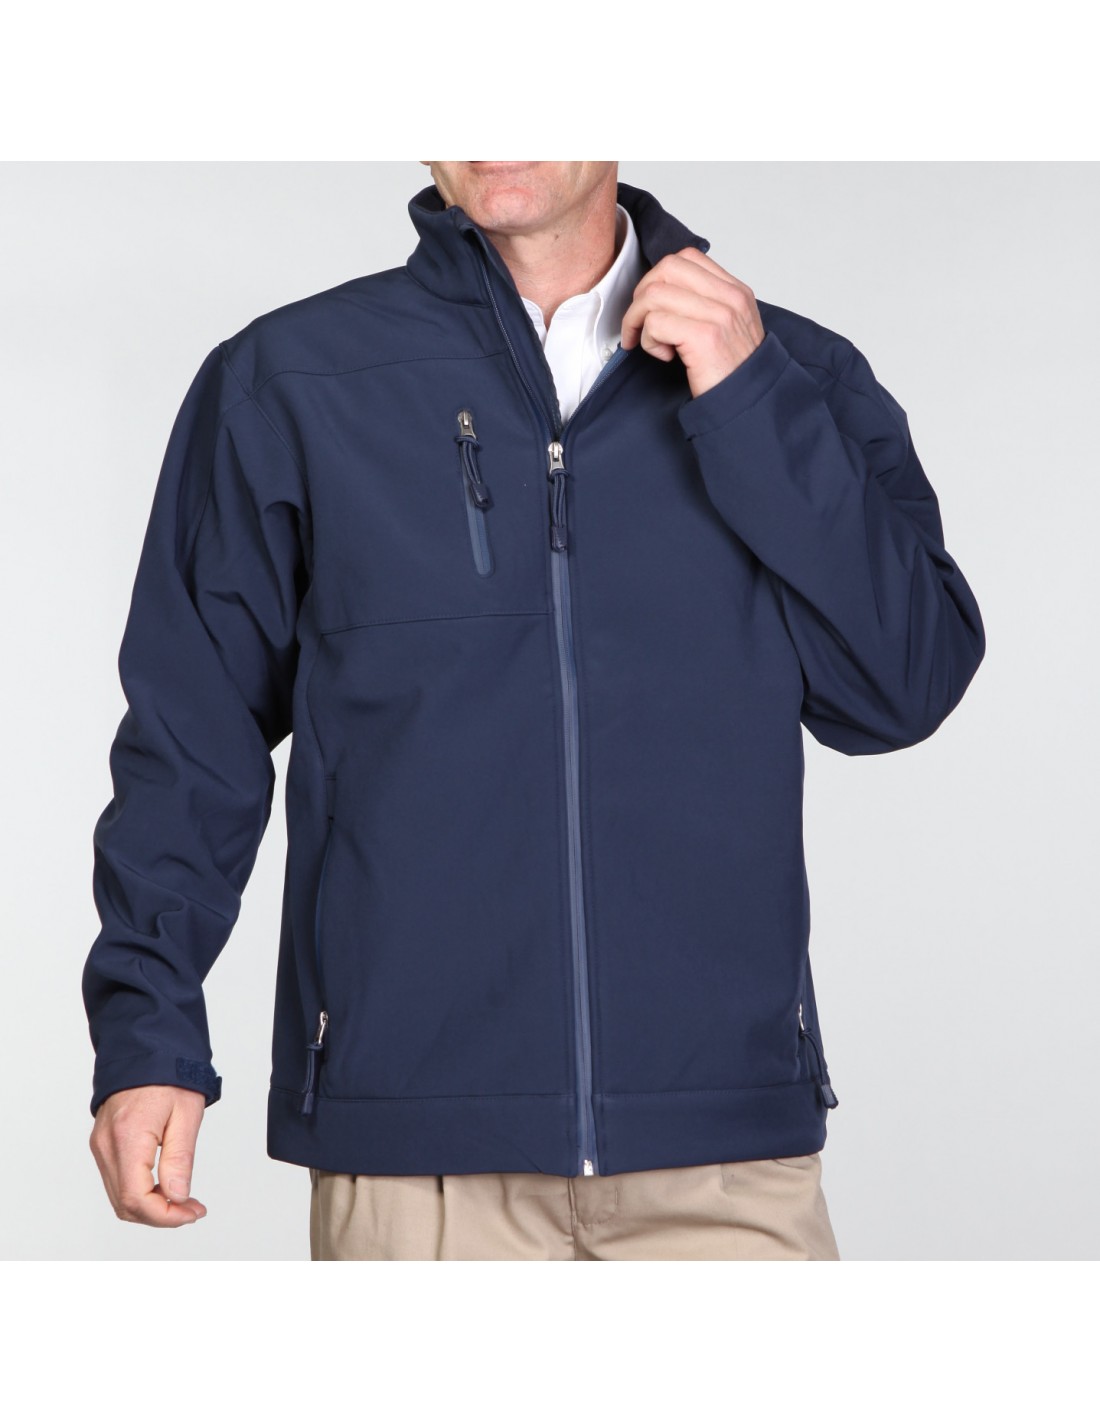 https://workit.cl/2967-thickbox_default/chaqueta-softshell-hombre.jpg